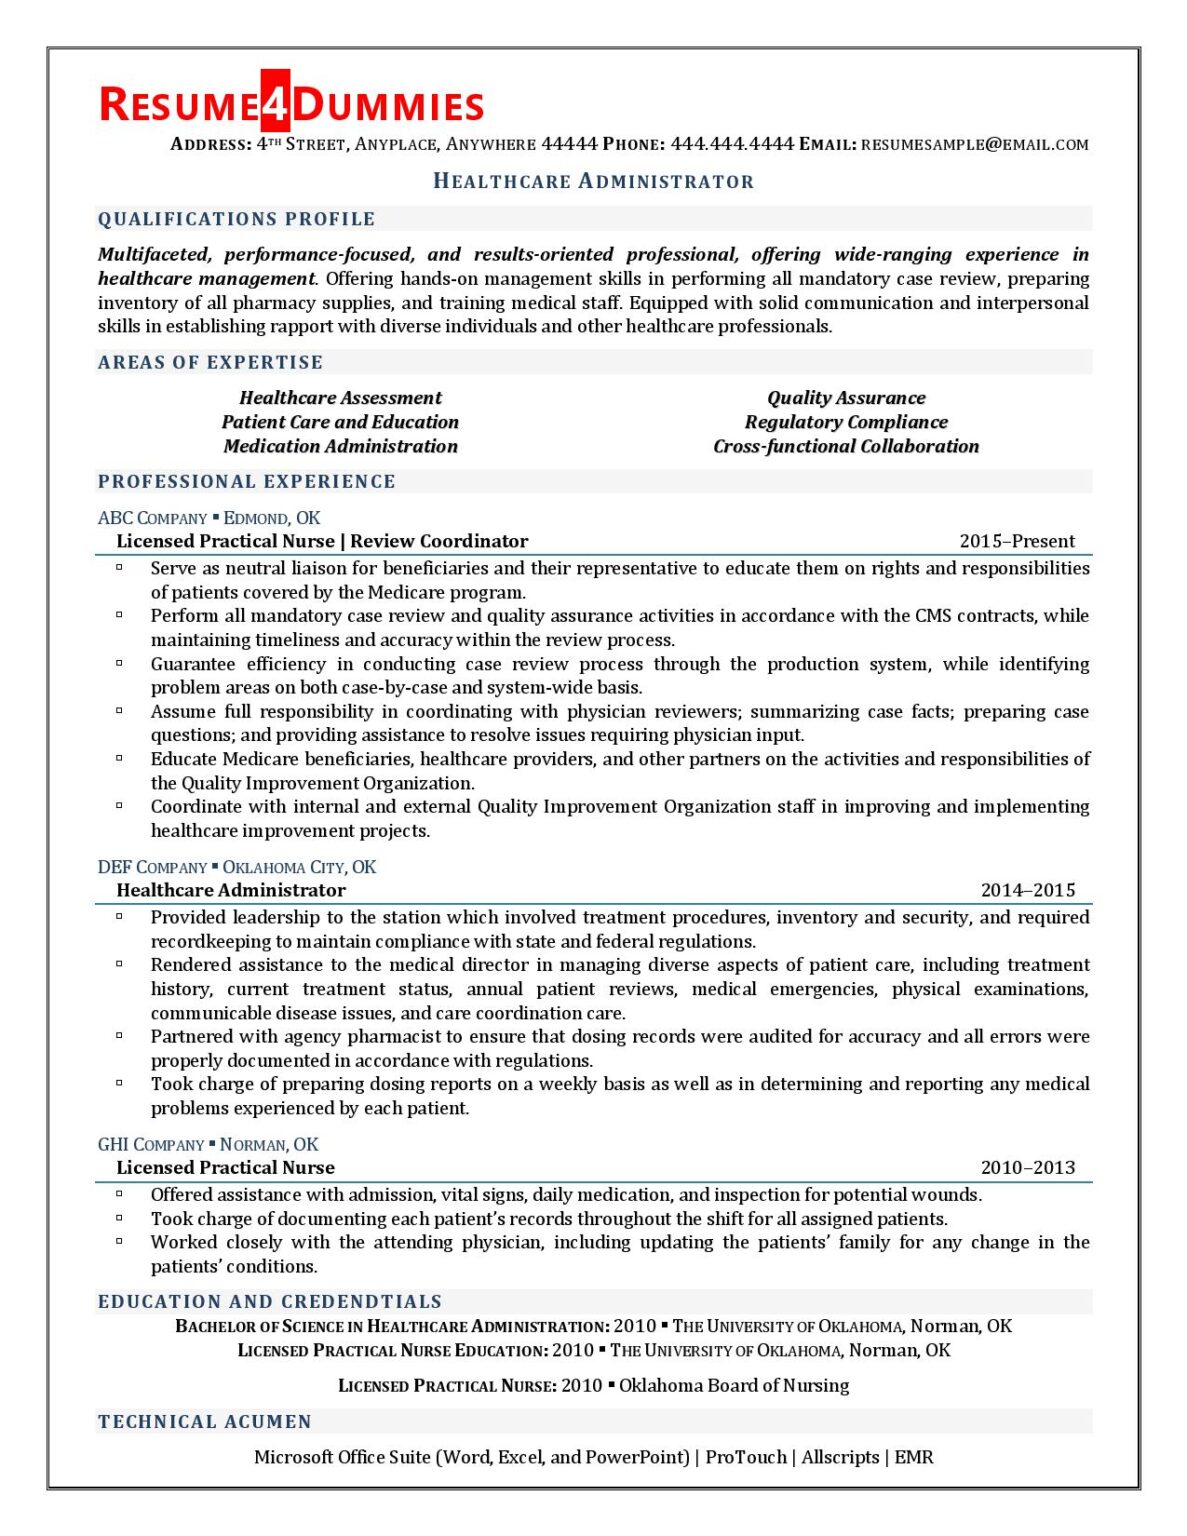 resume templates for healthcare jobs